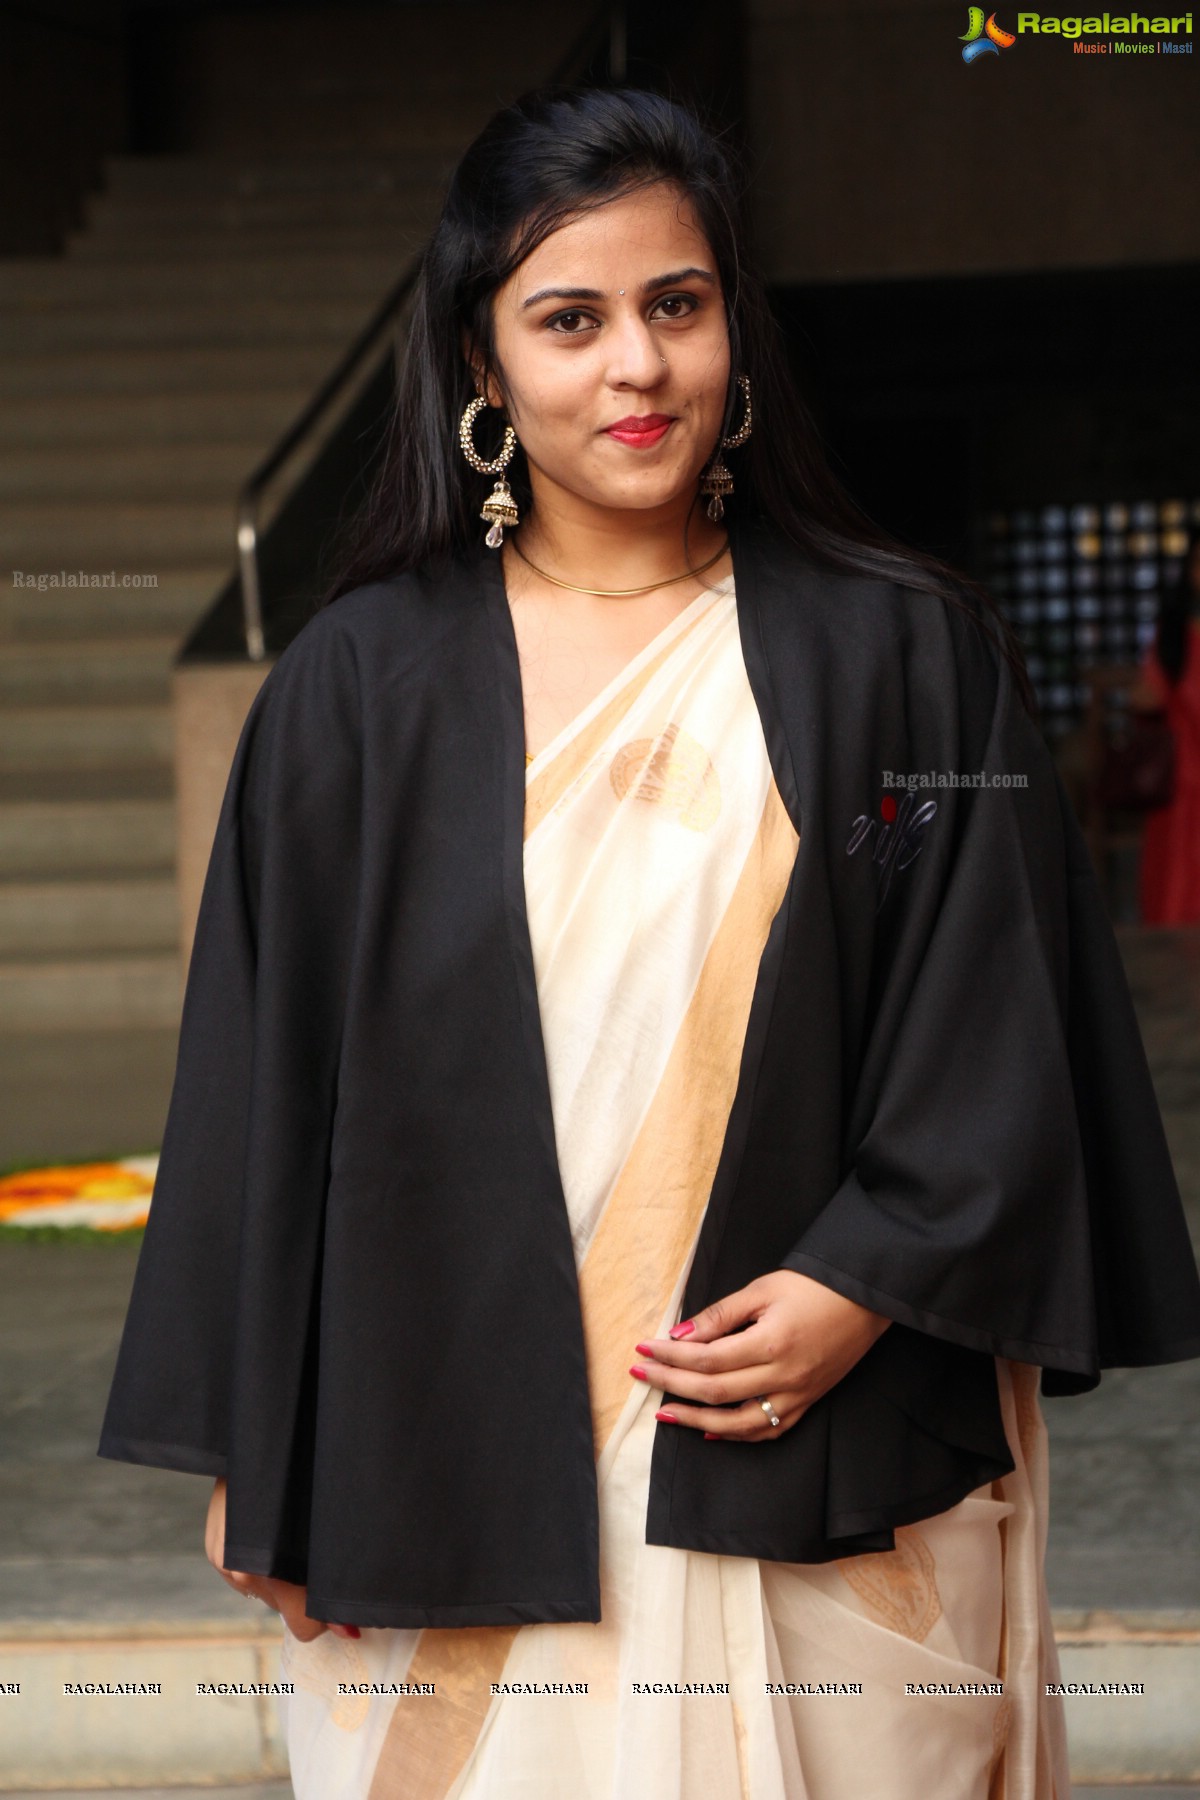 National Institute of Fashion Technology (NIFT) Convocation 2016, Hyderabad